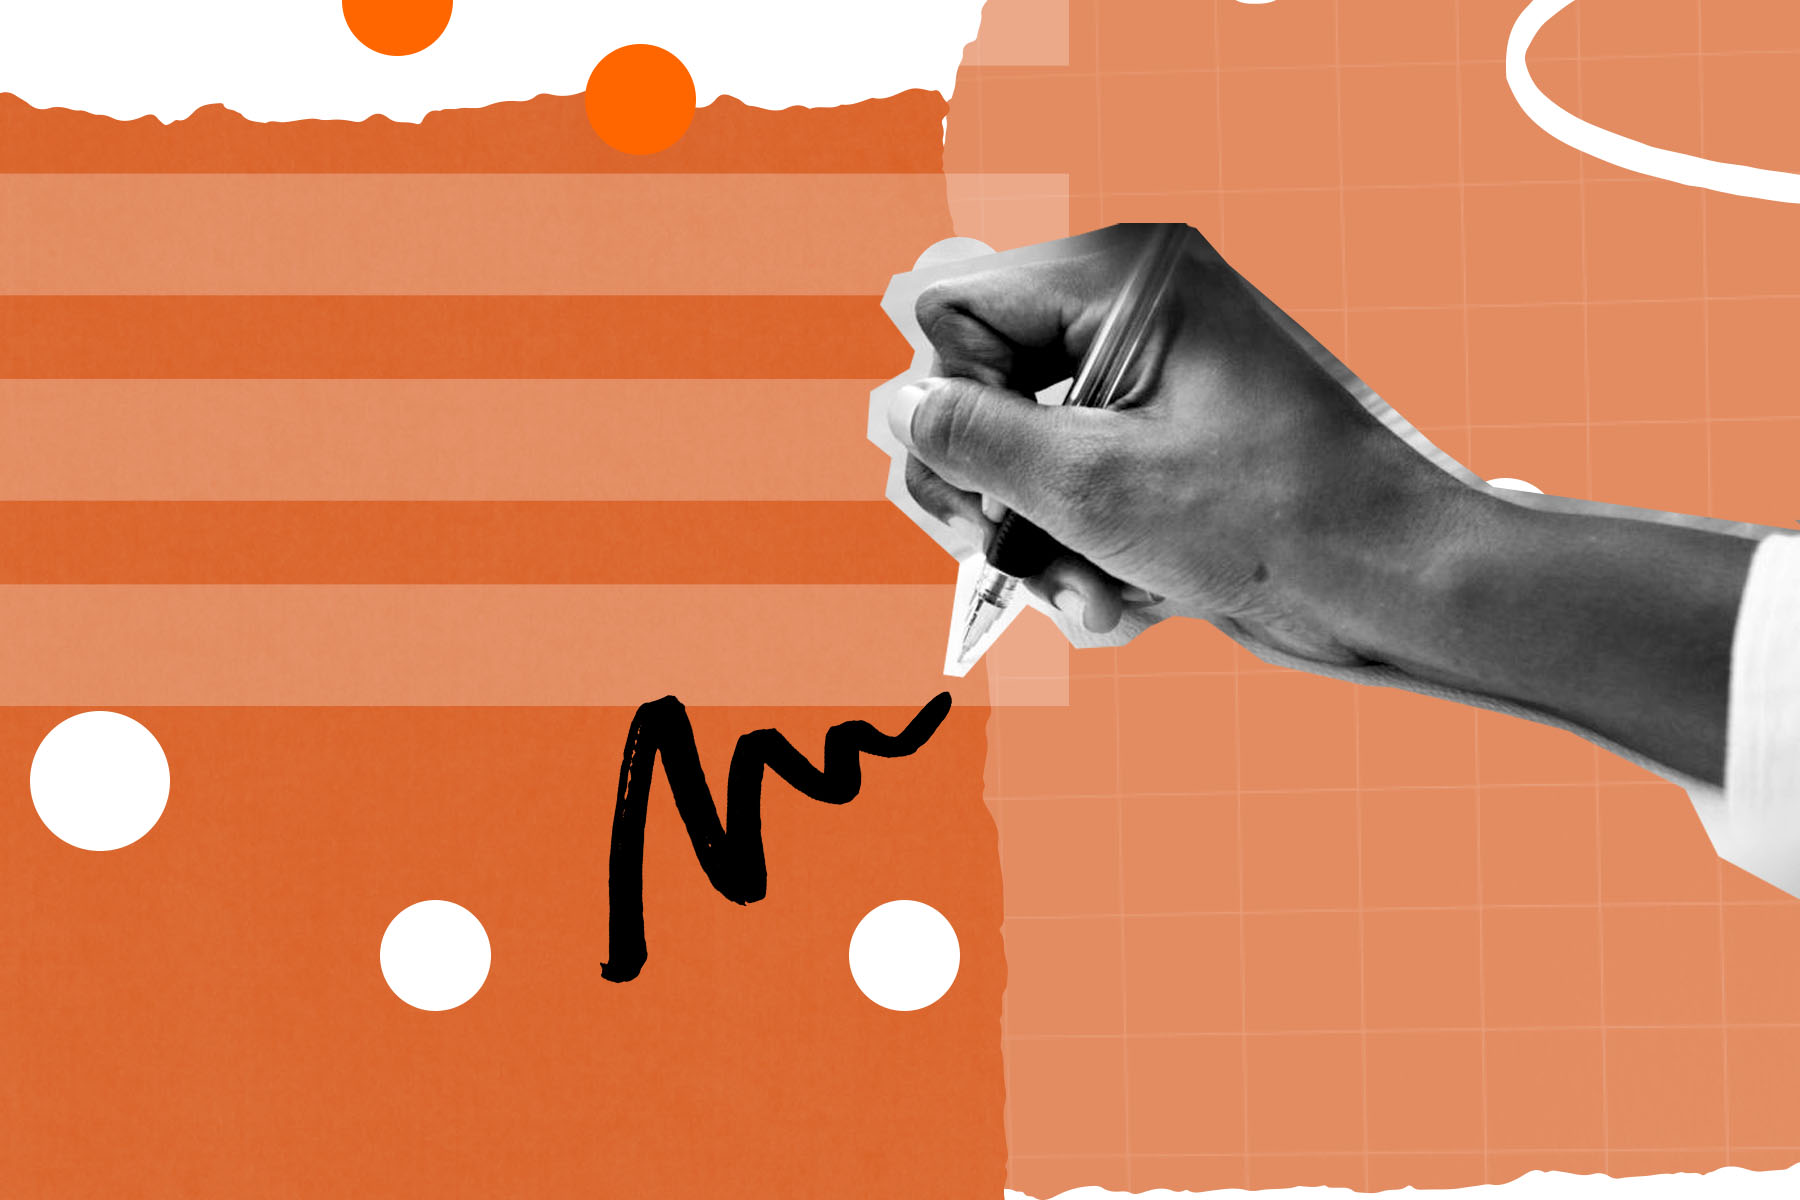 An mixed media illustration of someone holding a pen and a squiggle of ink coming out of it, surrounded by orange and white shapes